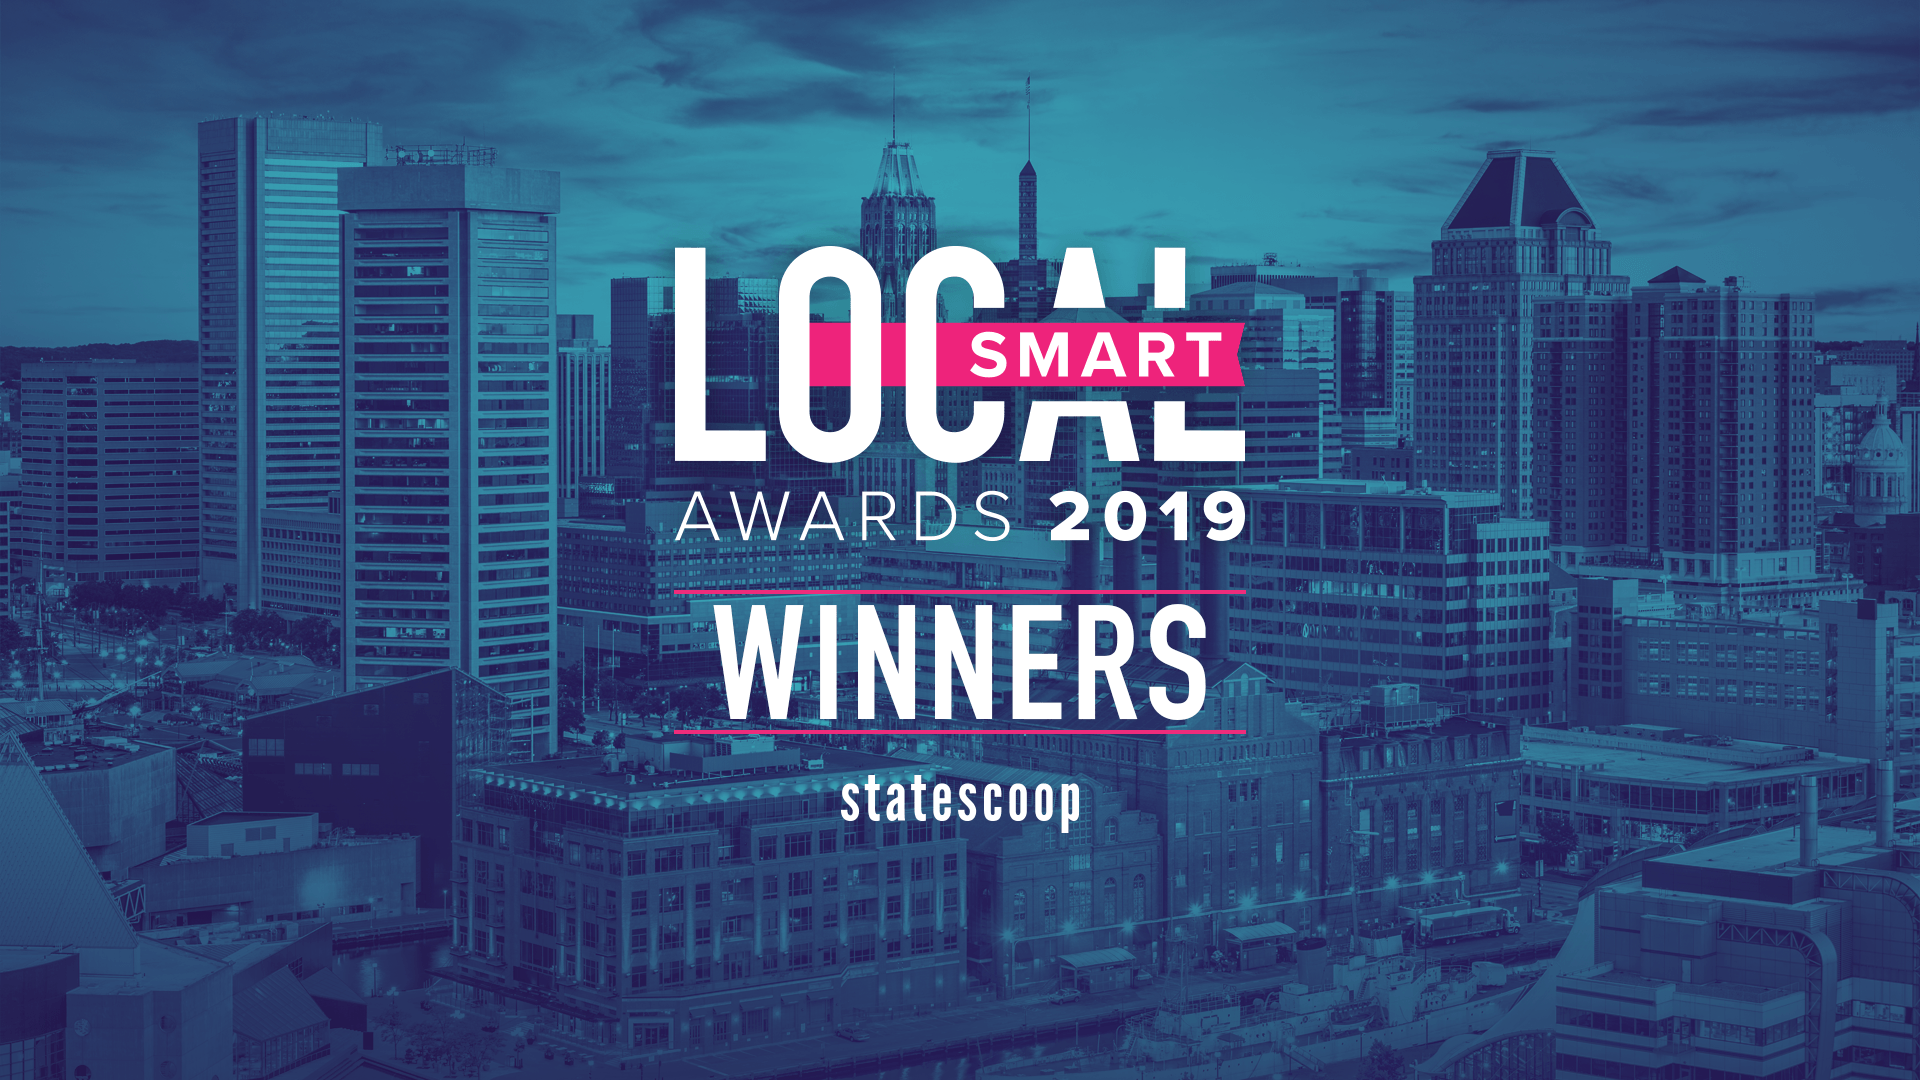 LocalSmart Awards honor top local government leaders, projects StateScoop